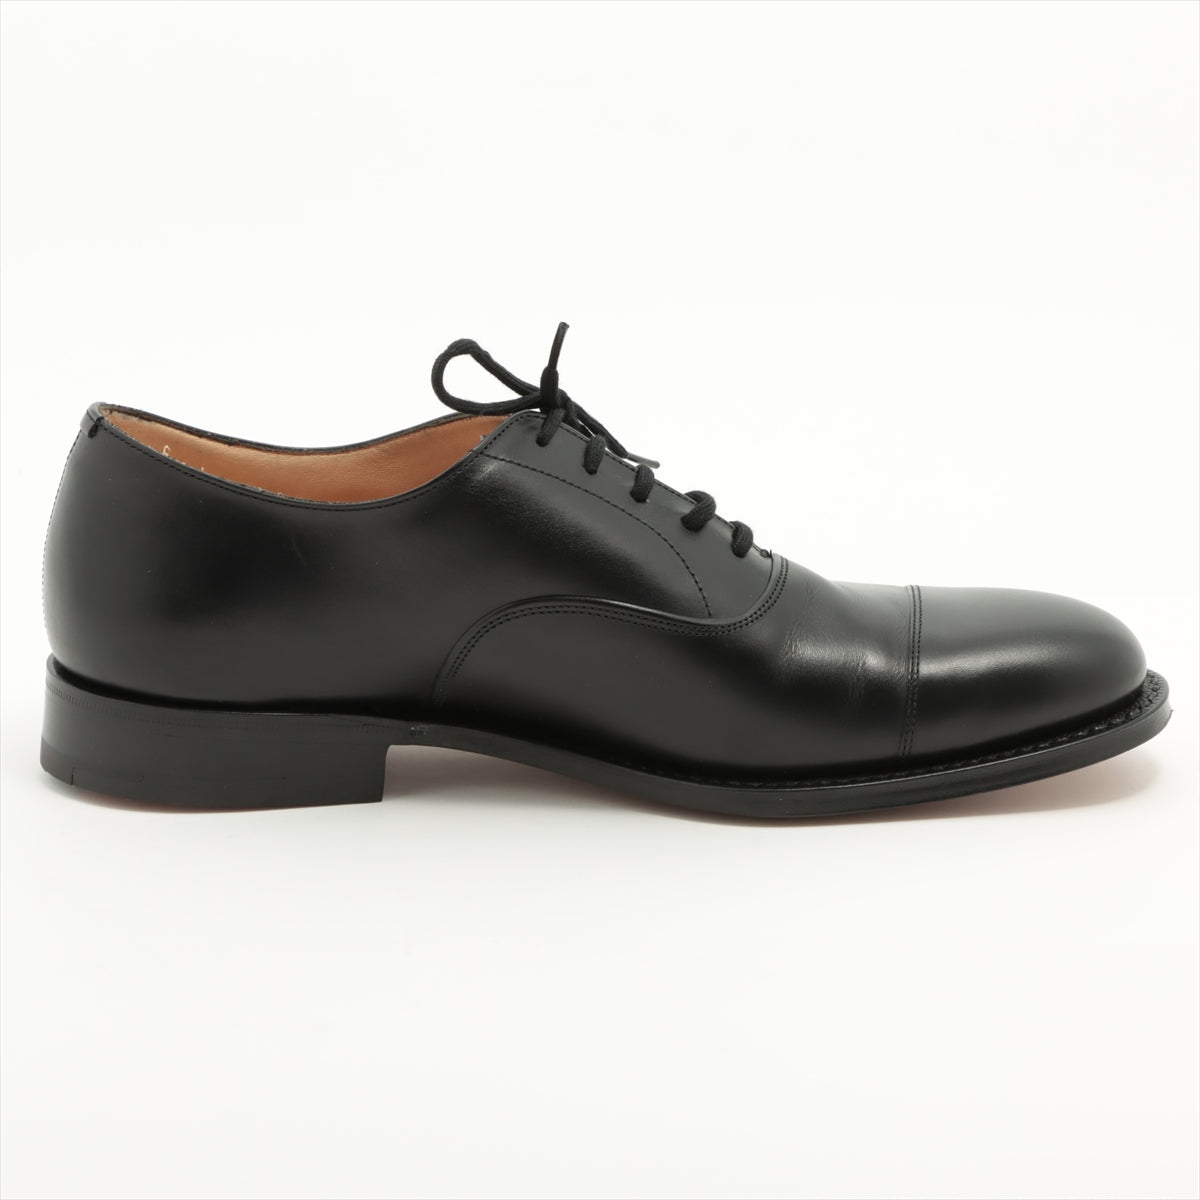 Church's Leather Dress shoes 70G Men's Black BALMORAL last 100 Is there a replacement string